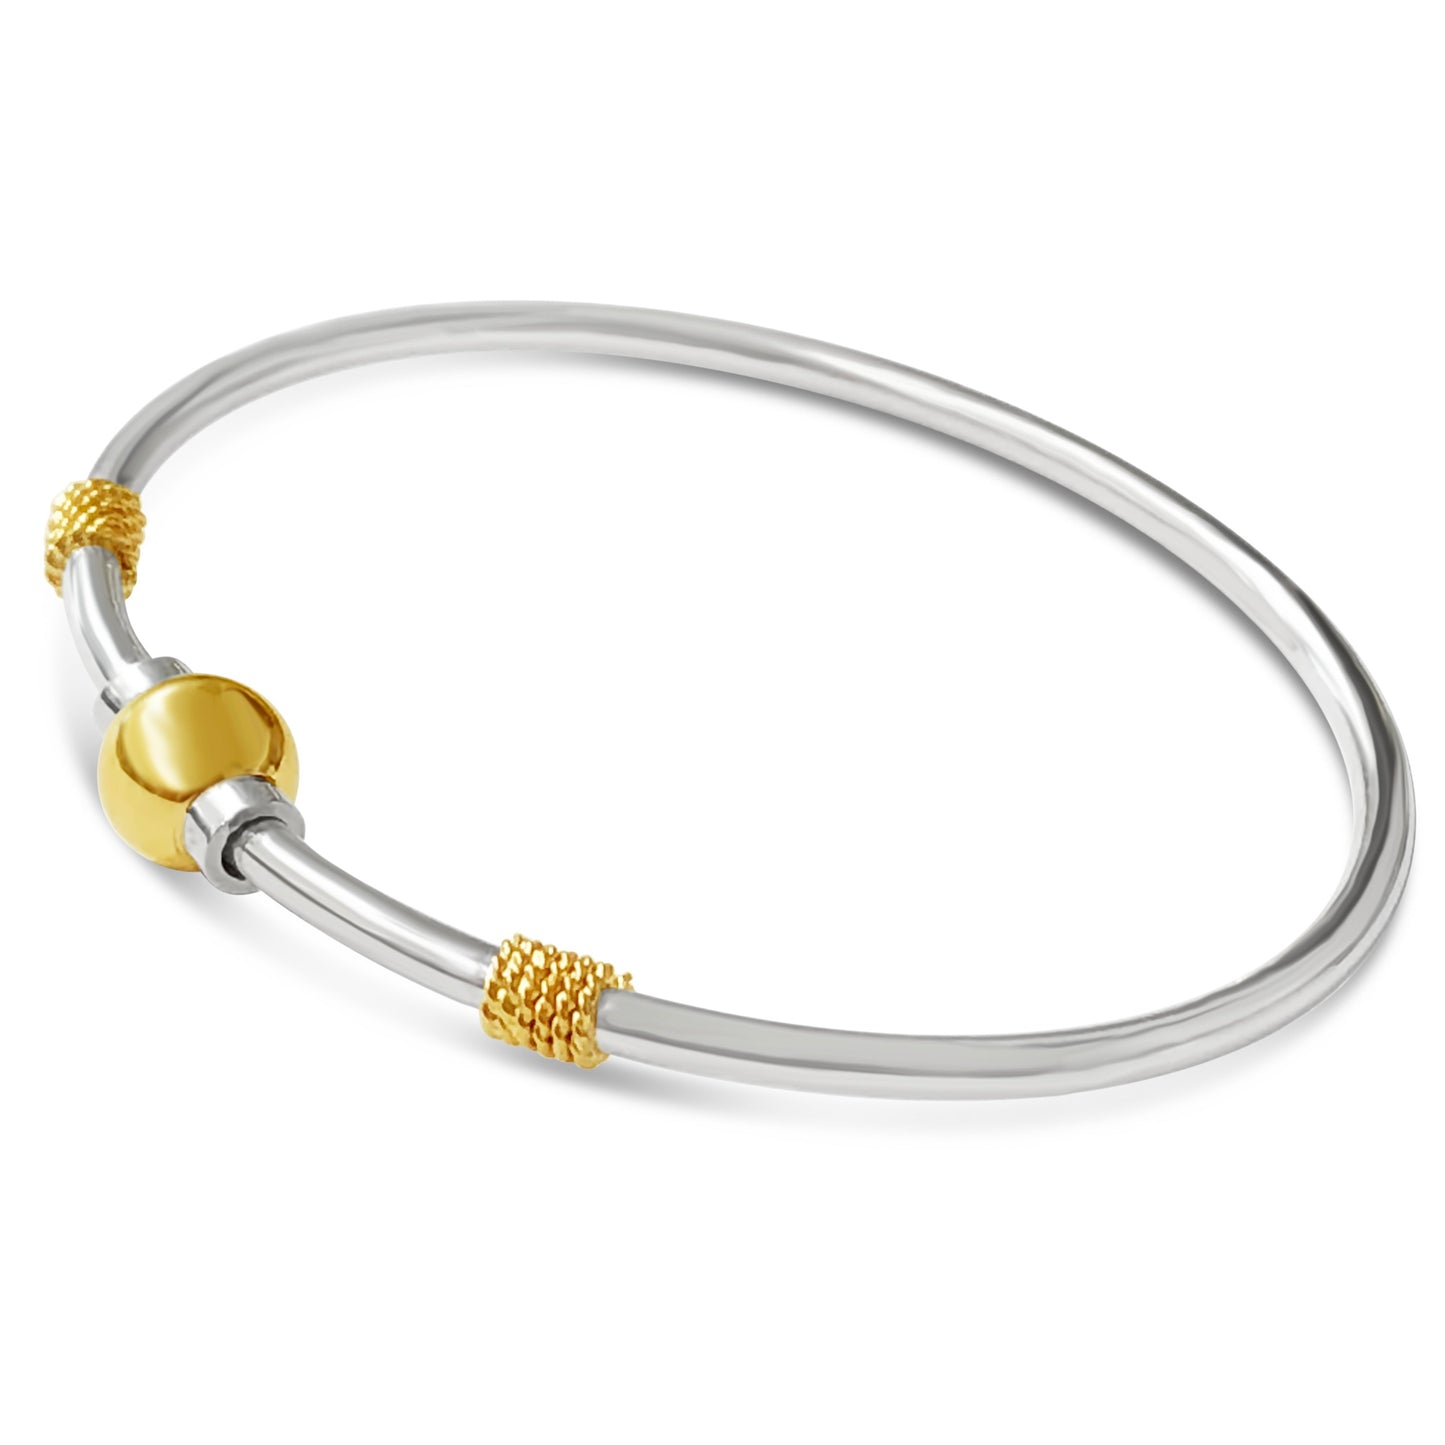 cape cod beachball bracelet with nautical rope 14k gold sterling silver made on cape cod